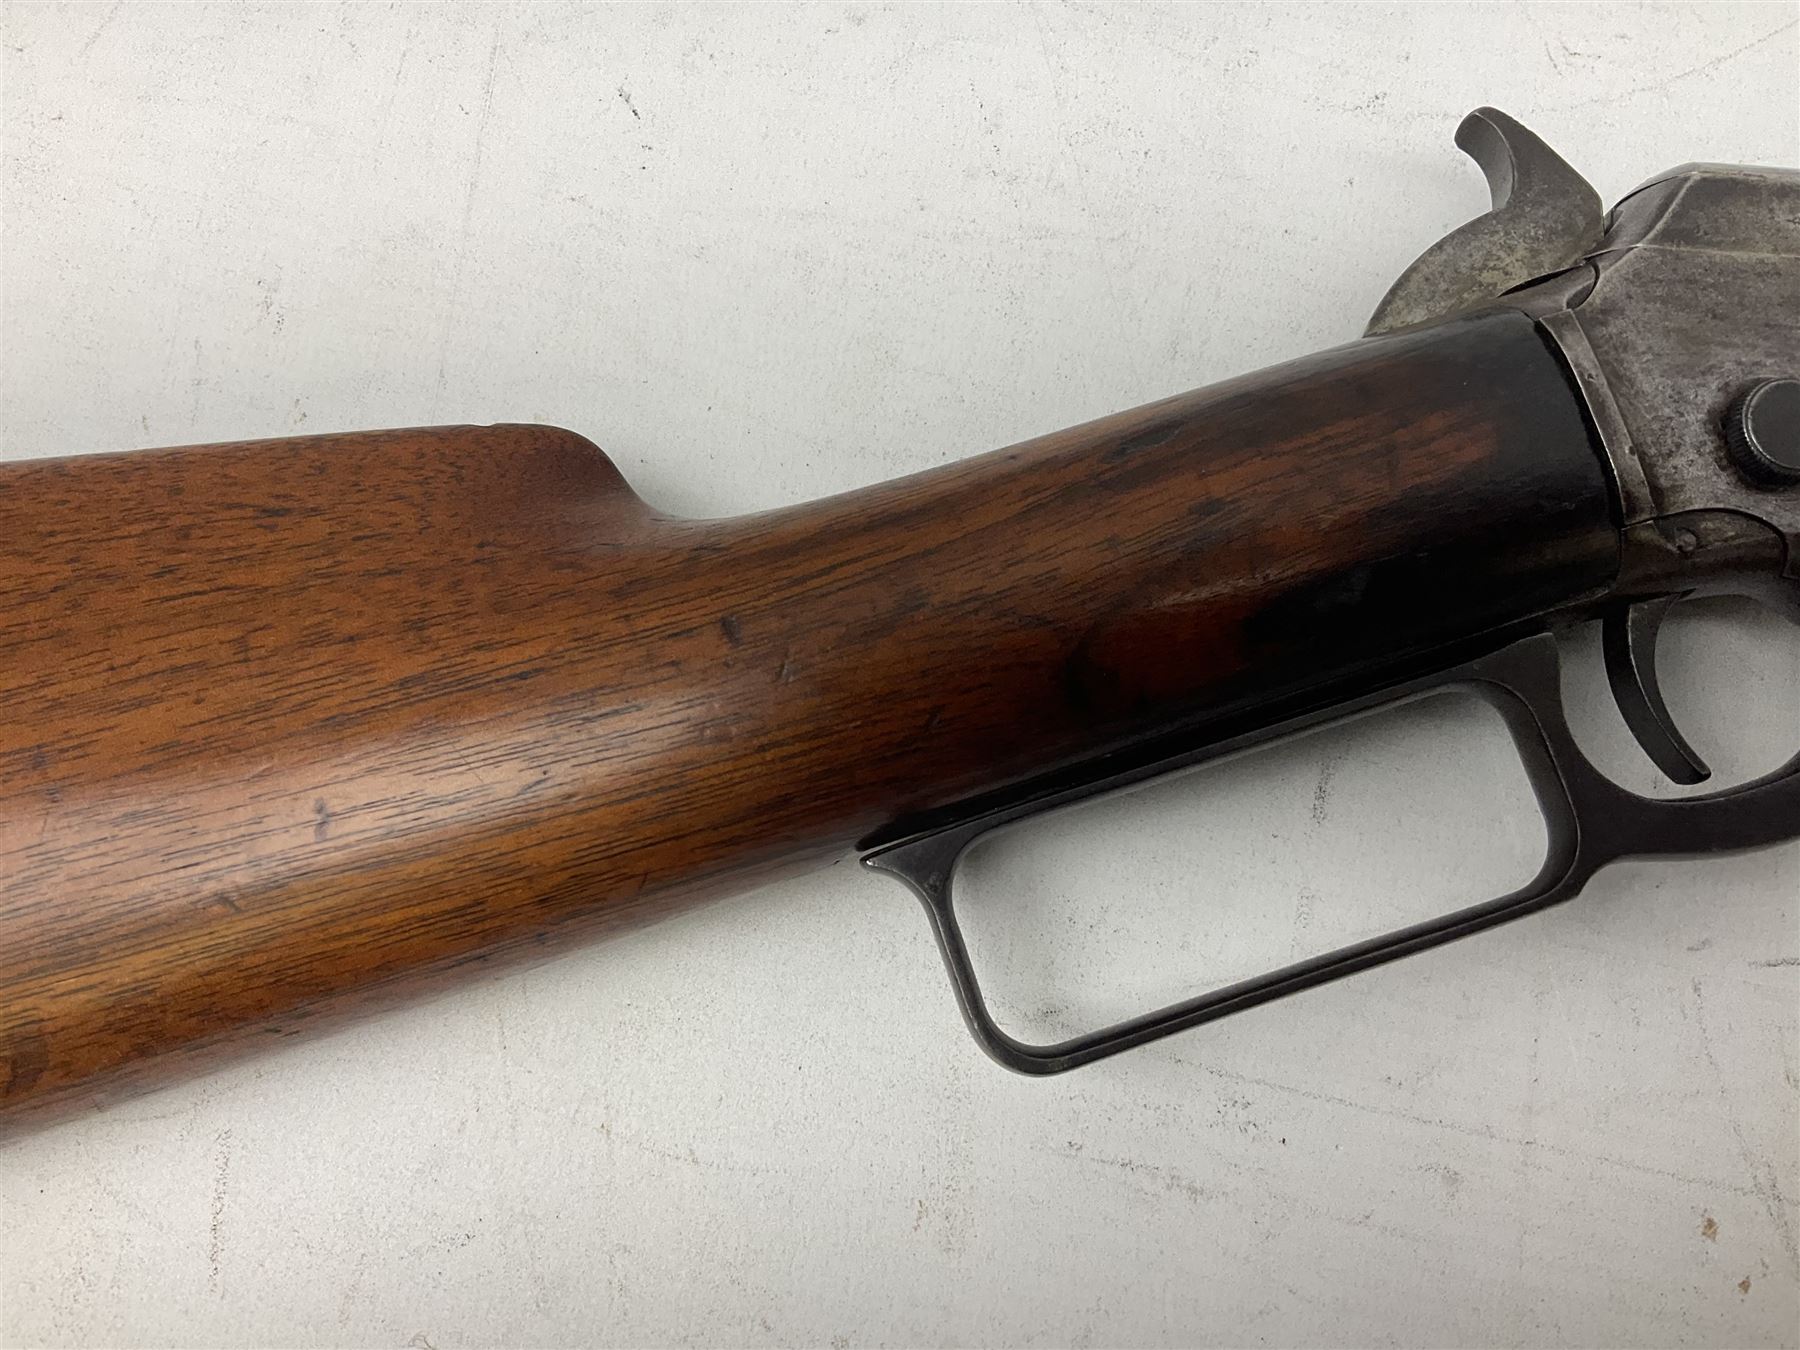 Marlin Firearms Co. USA 'Safety' .32 rim-fire rifle dated 1892 - Image 3 of 15